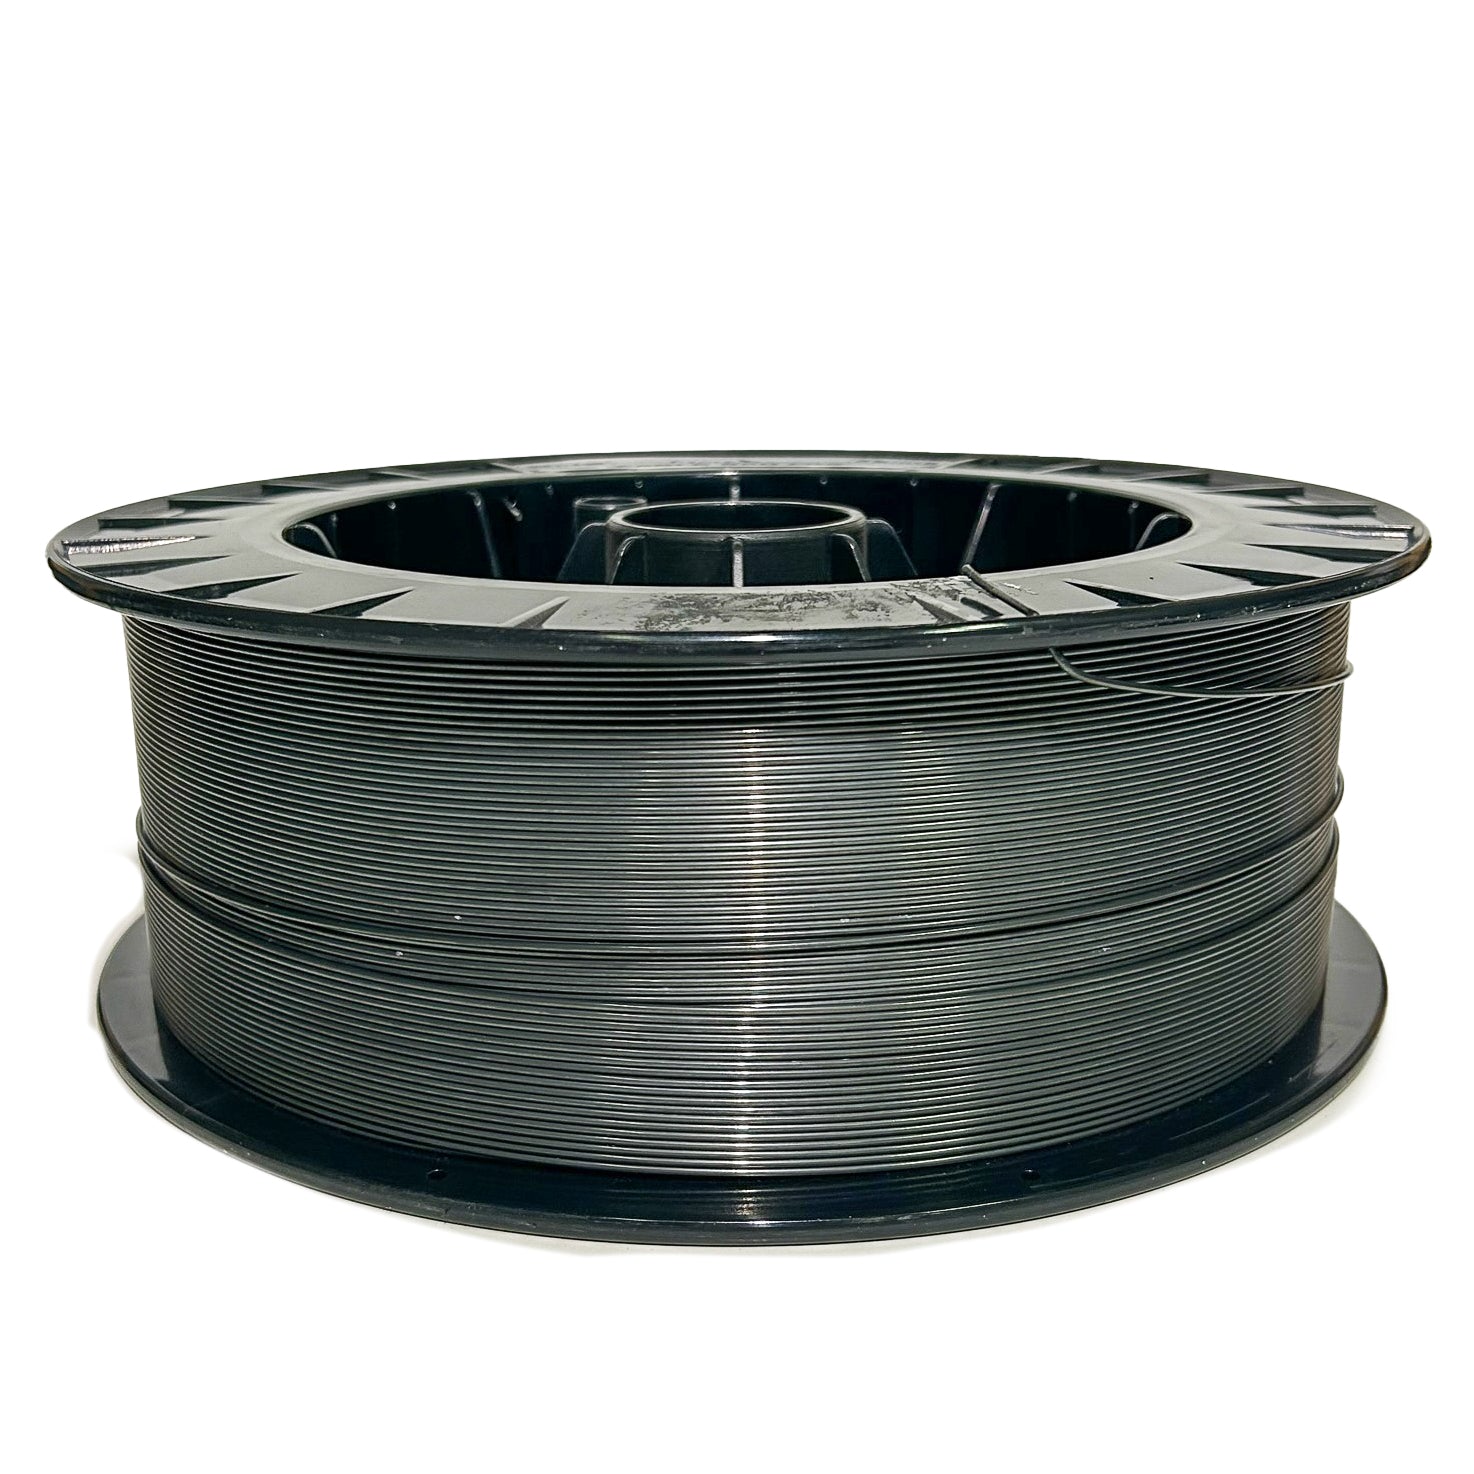 EAGLE 560 FGS Superior gas shielded flux cored wire for slight impact and high abrasion.